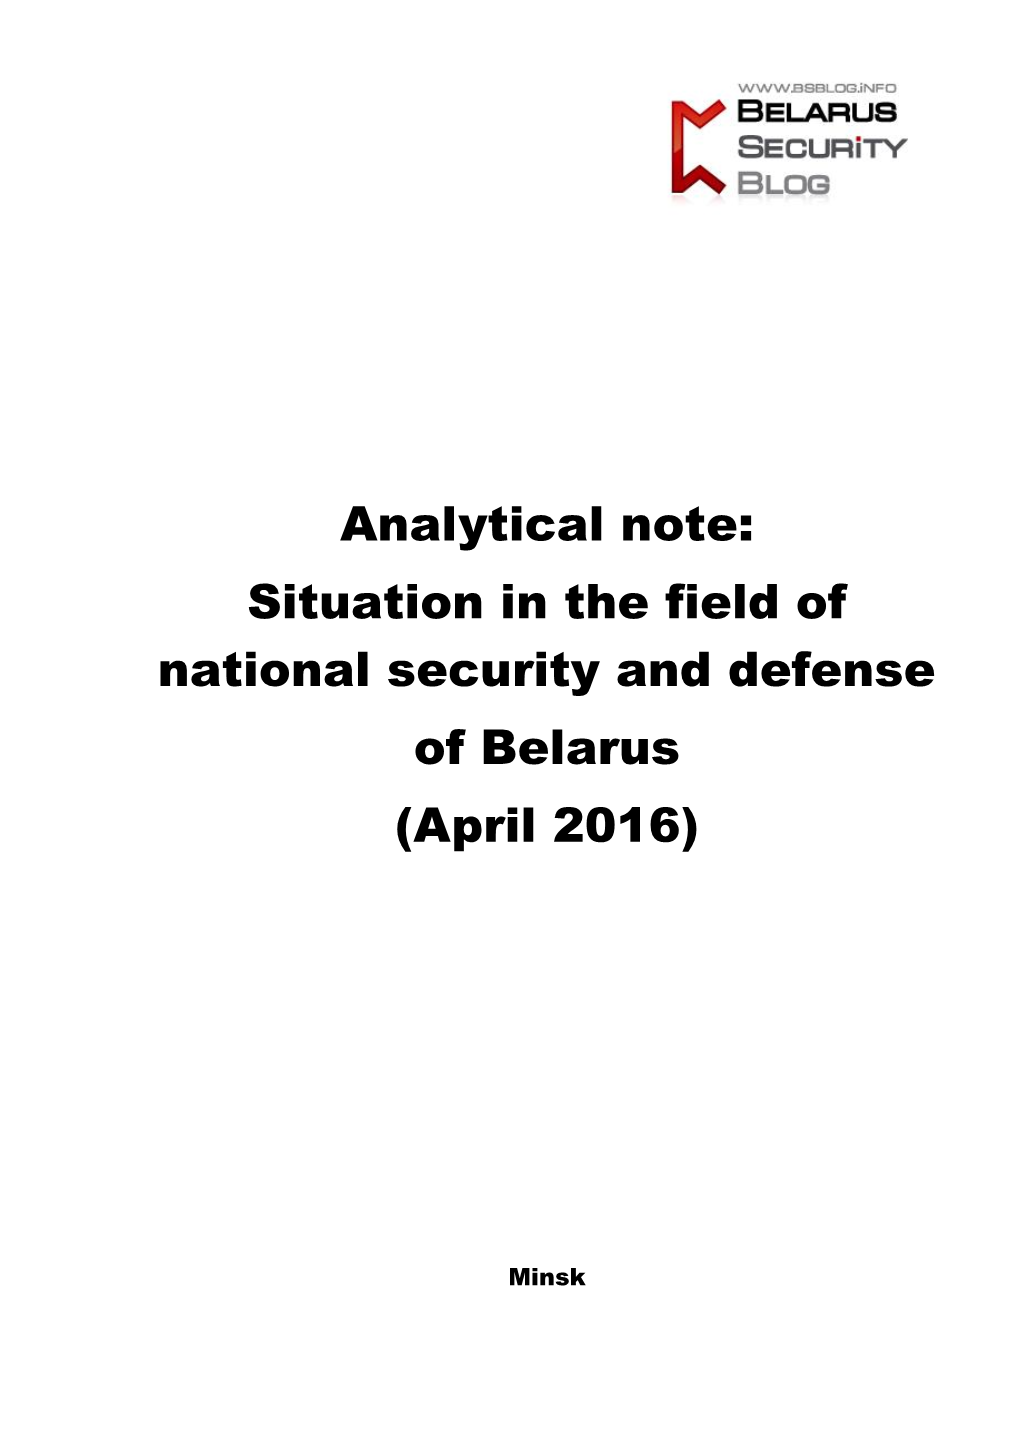 Analytical Note: Situation in the Field of National Security and Defense of Belarus (April 2016)